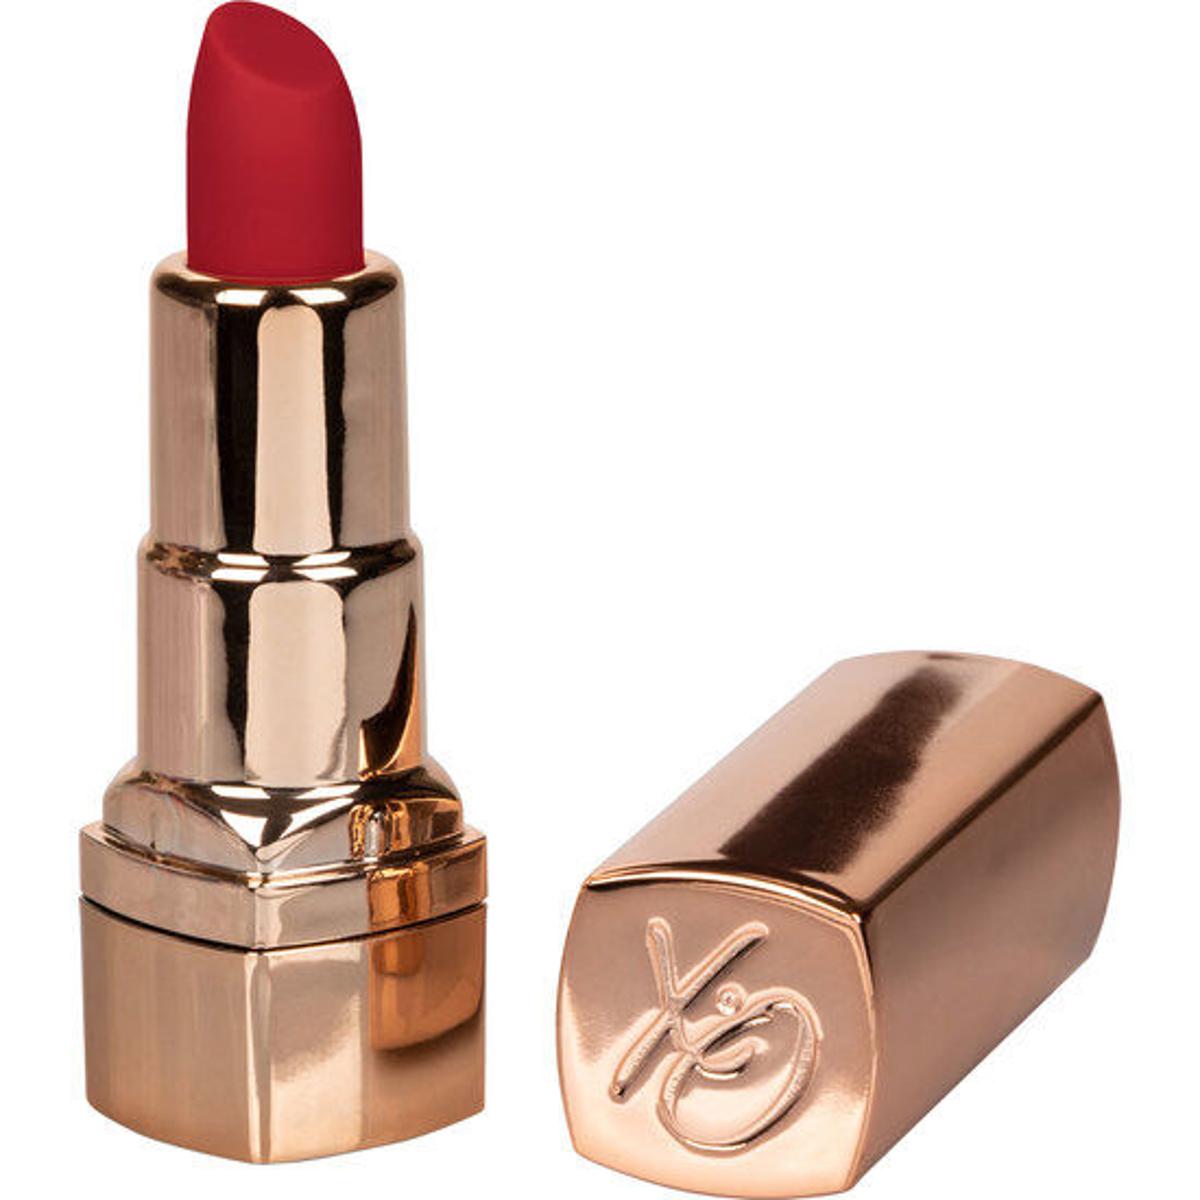 CALEX RECHARGEABLE LIPSTICK BULLET HIDE & PLAY - OH MY! FANTASY